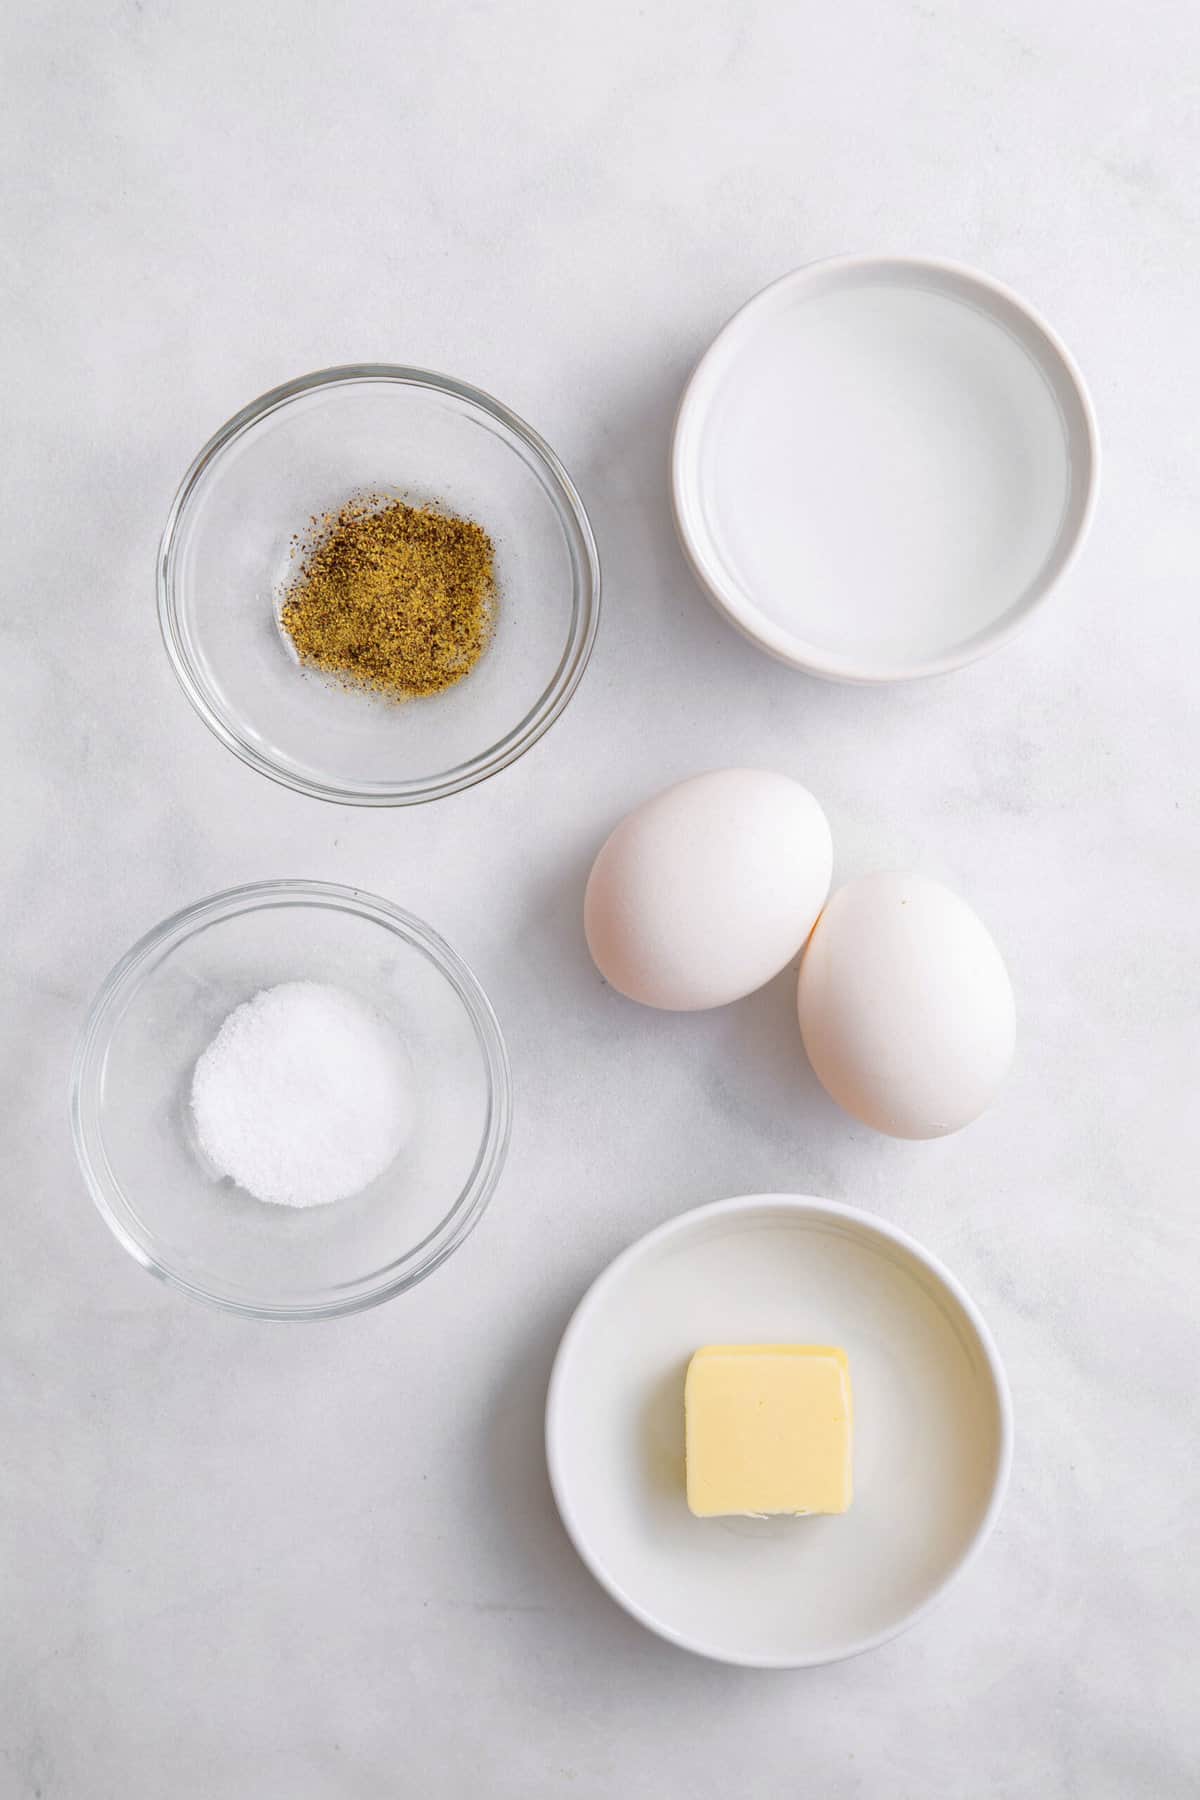 ingredients to make basted eggs